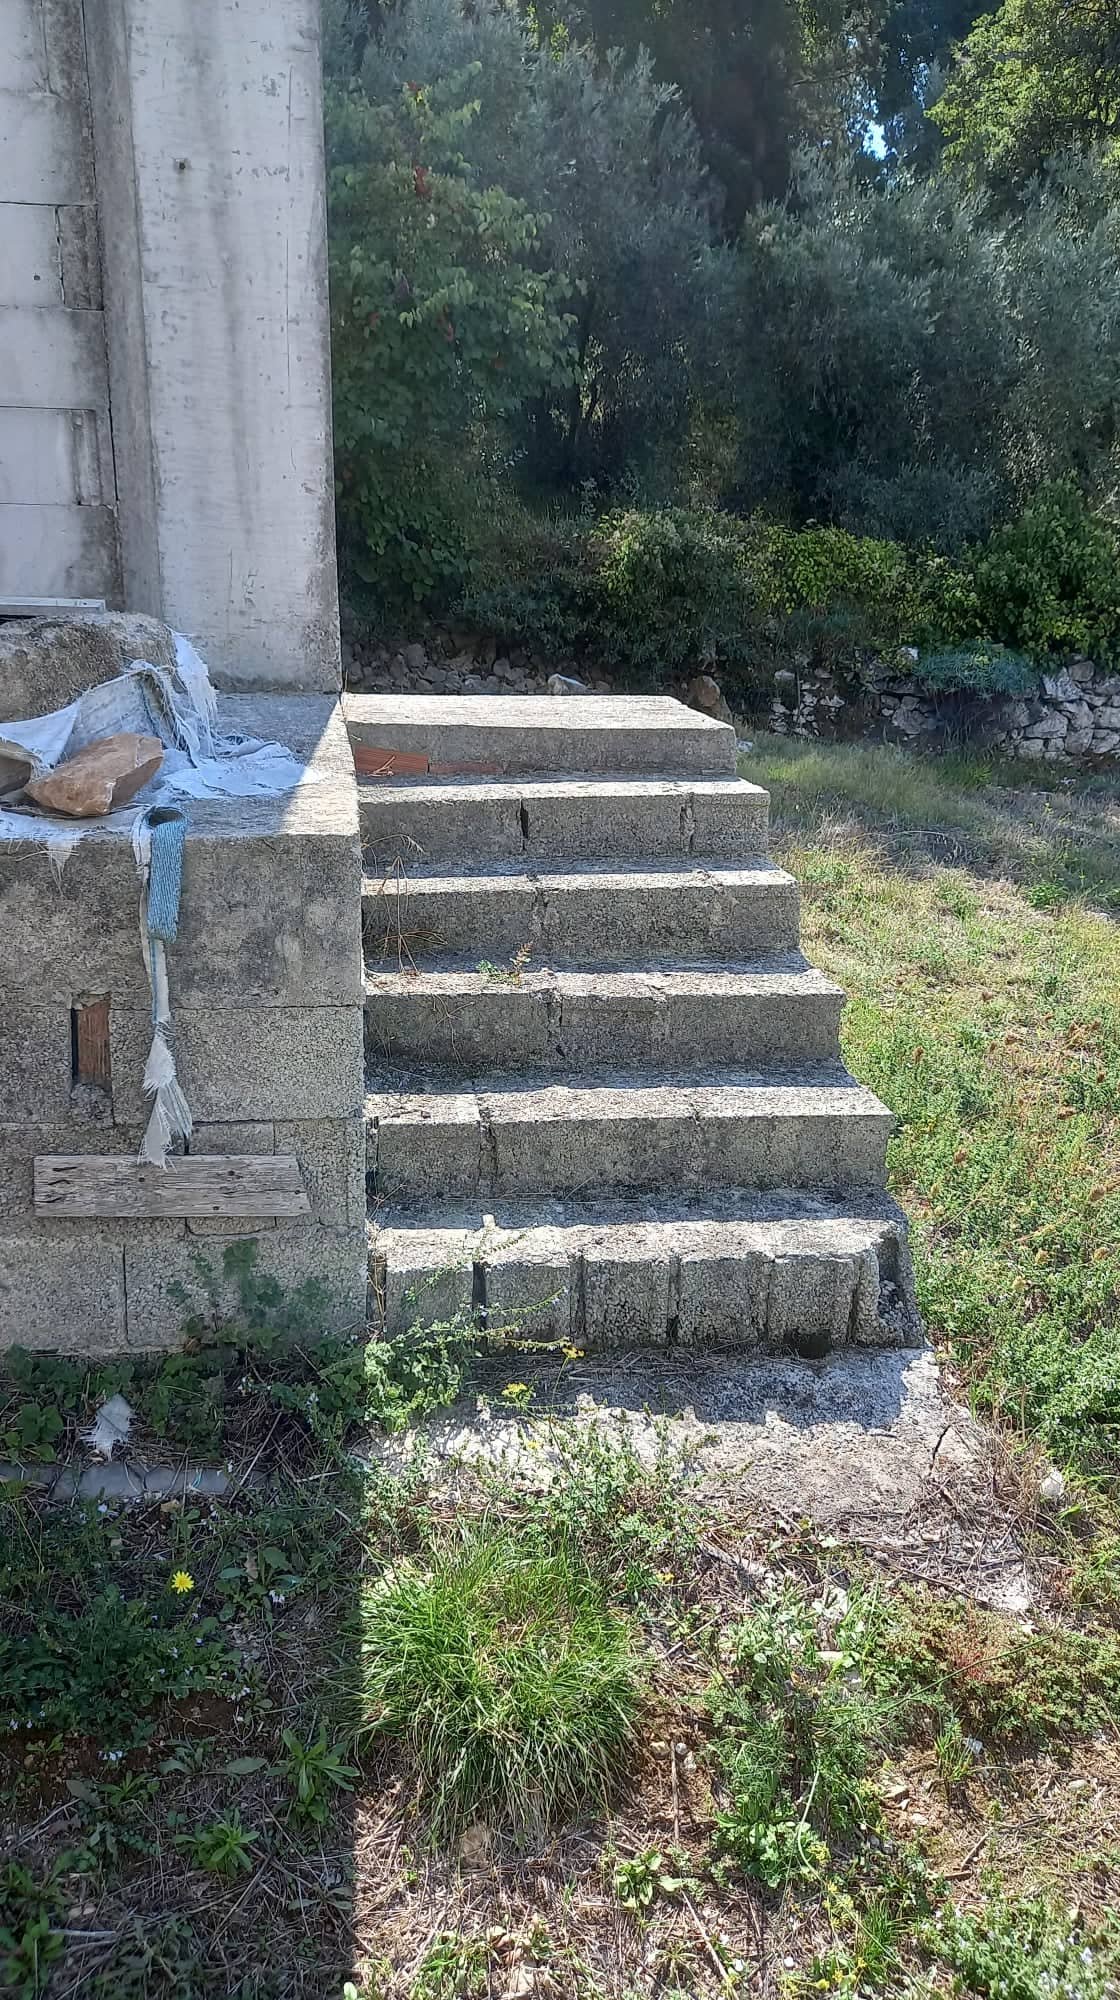 unfinished_house_in_wonderful_location_steps.jpg